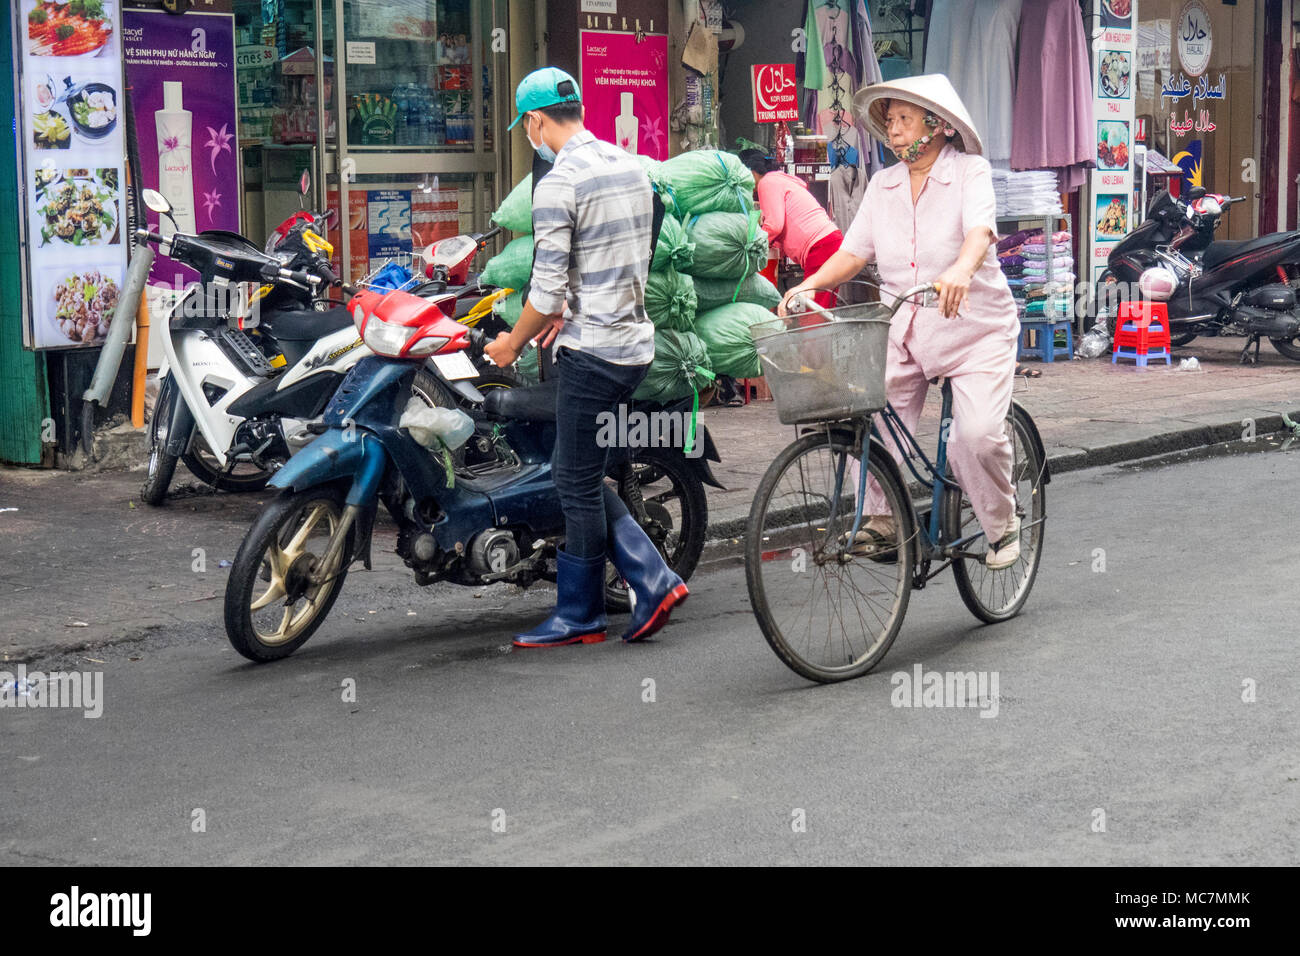 An elderly woman wearing a pink outfit and a conical hat cycling on a street in Ho Chi Minh City, Vietnam. Stock Photo